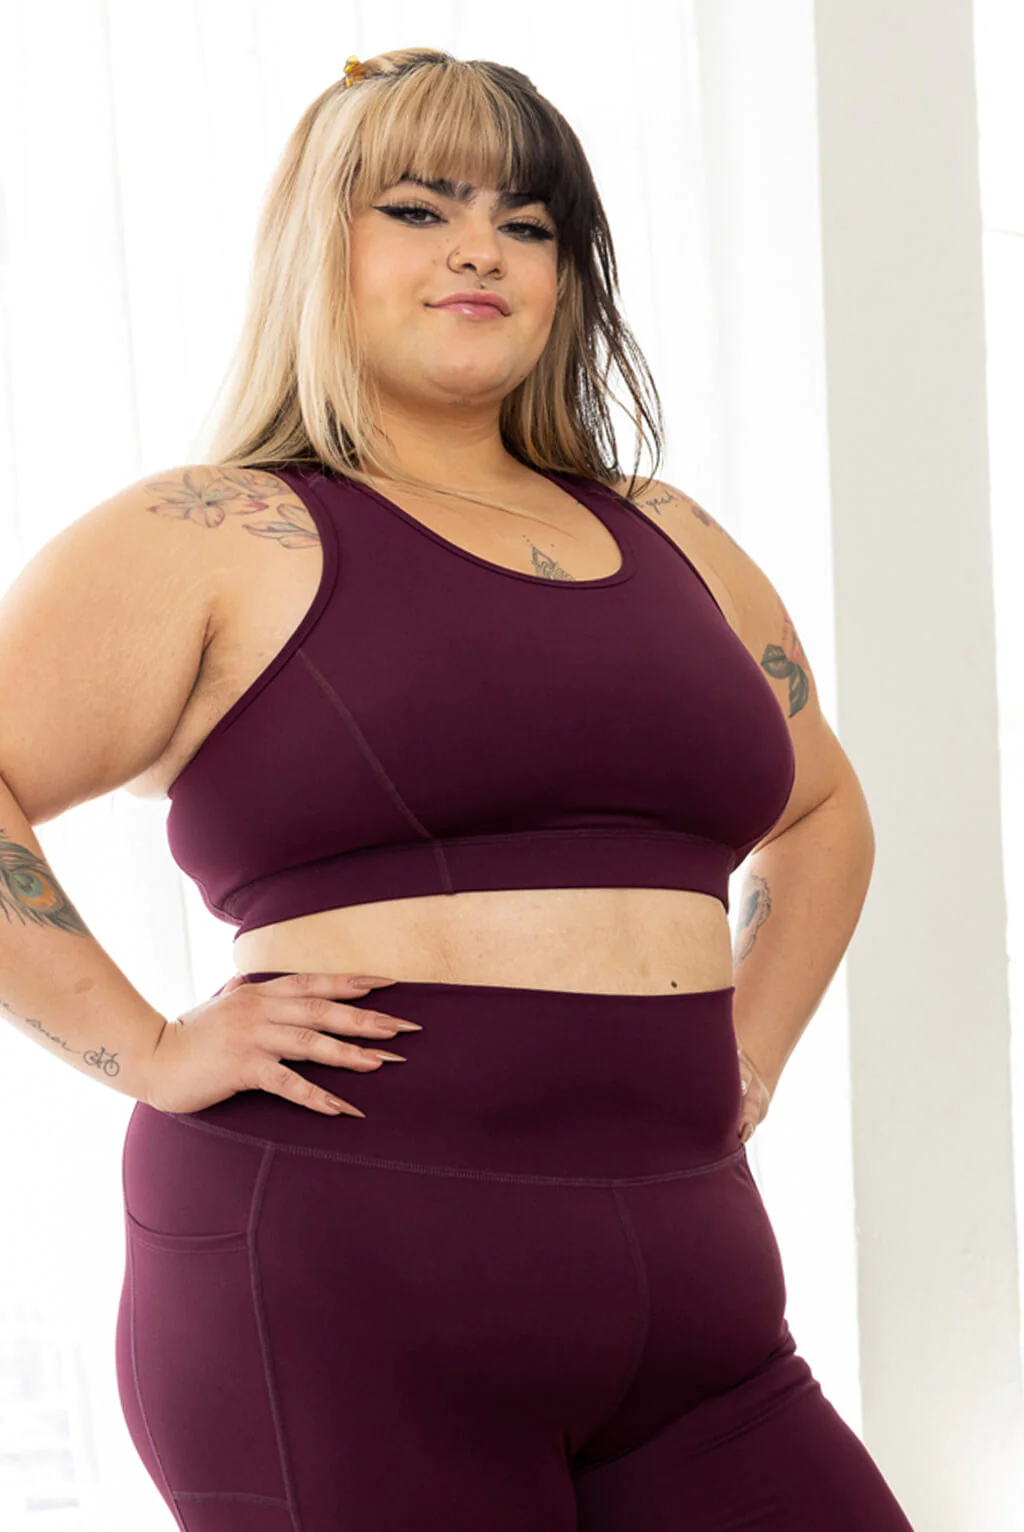  Plus Size Workout Tops